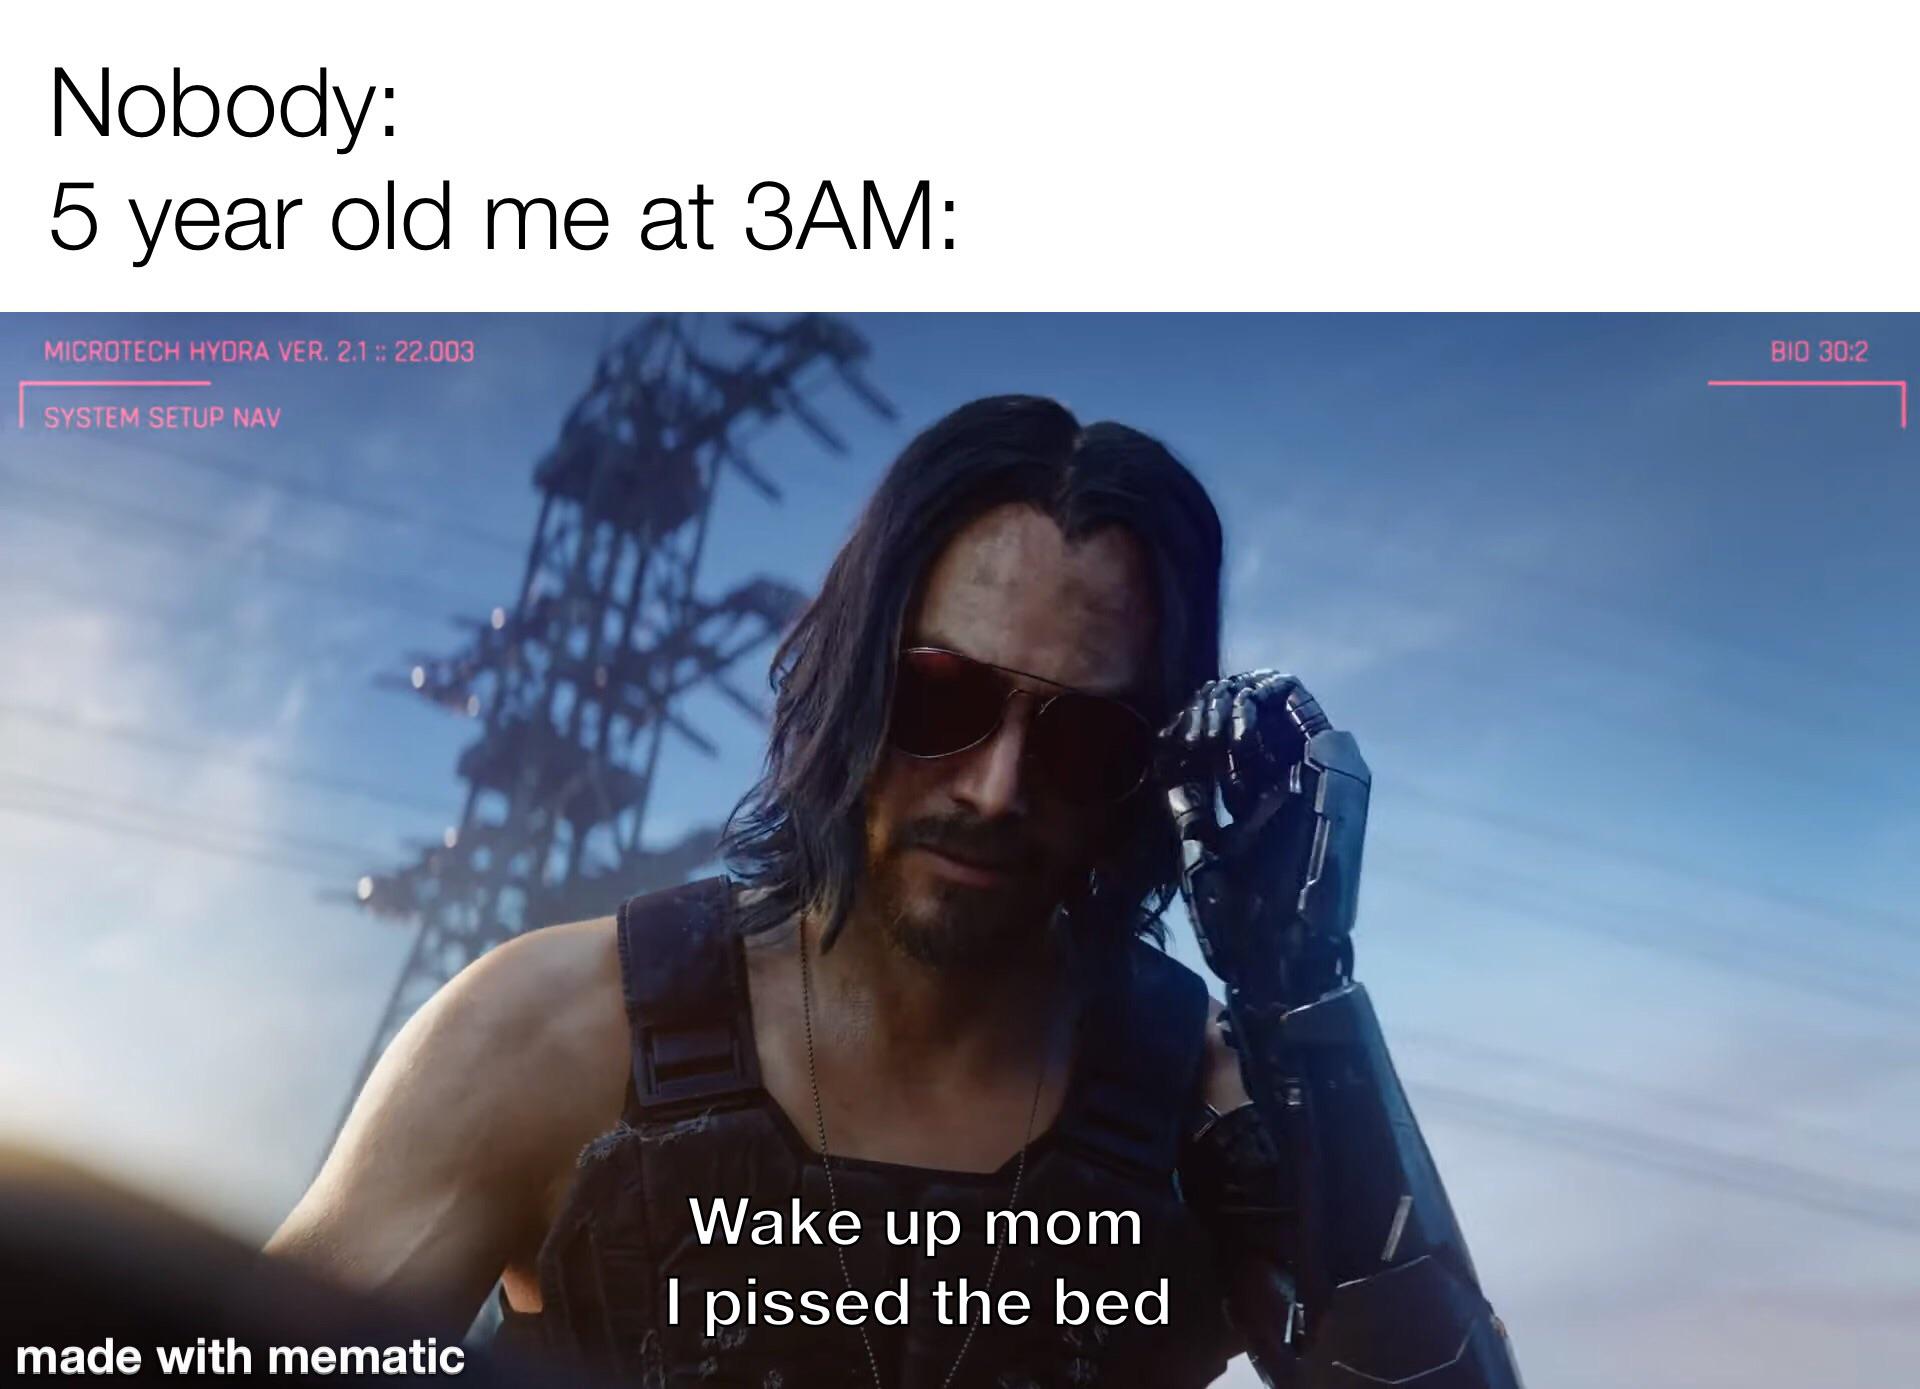 bronn meme 9gag - Nobody 5 year old me at 3AM Microtech Hydra Ver. 2.1 22.003 Bio System Setup Nav Wake up mom I pissed the bed made with mematic